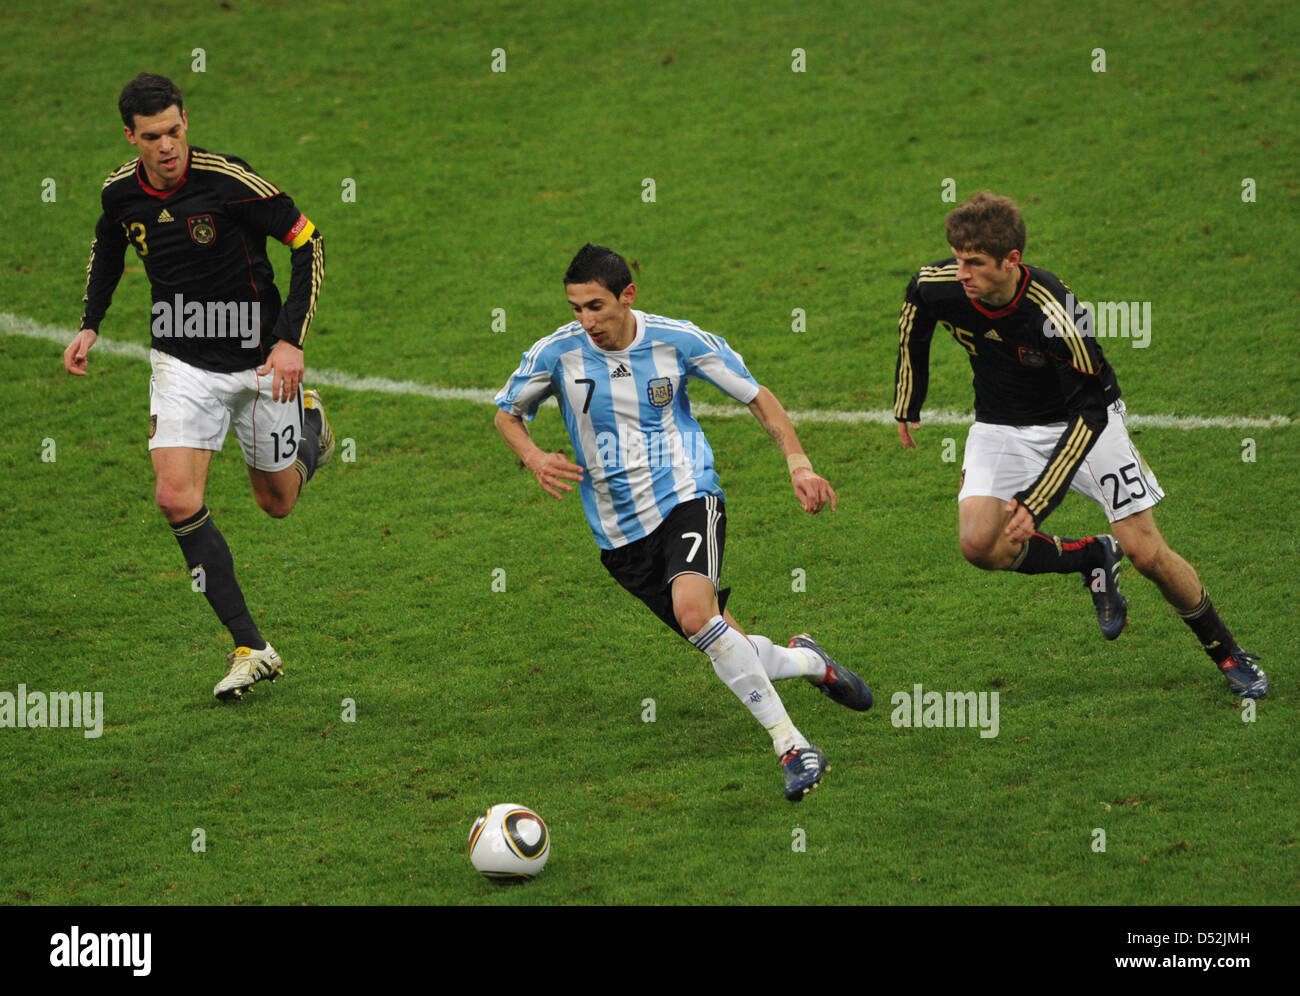 Germany's Michael Ballack (L) and Thomas Mueller (R) and Argentina's Angel di Maria vie for the ball during the soccer friendly match Germany vs Argentina at AllianzArena stadium in Munich, Germany, 03 March 2010. Photo: Peter Kneffel Stock Photo